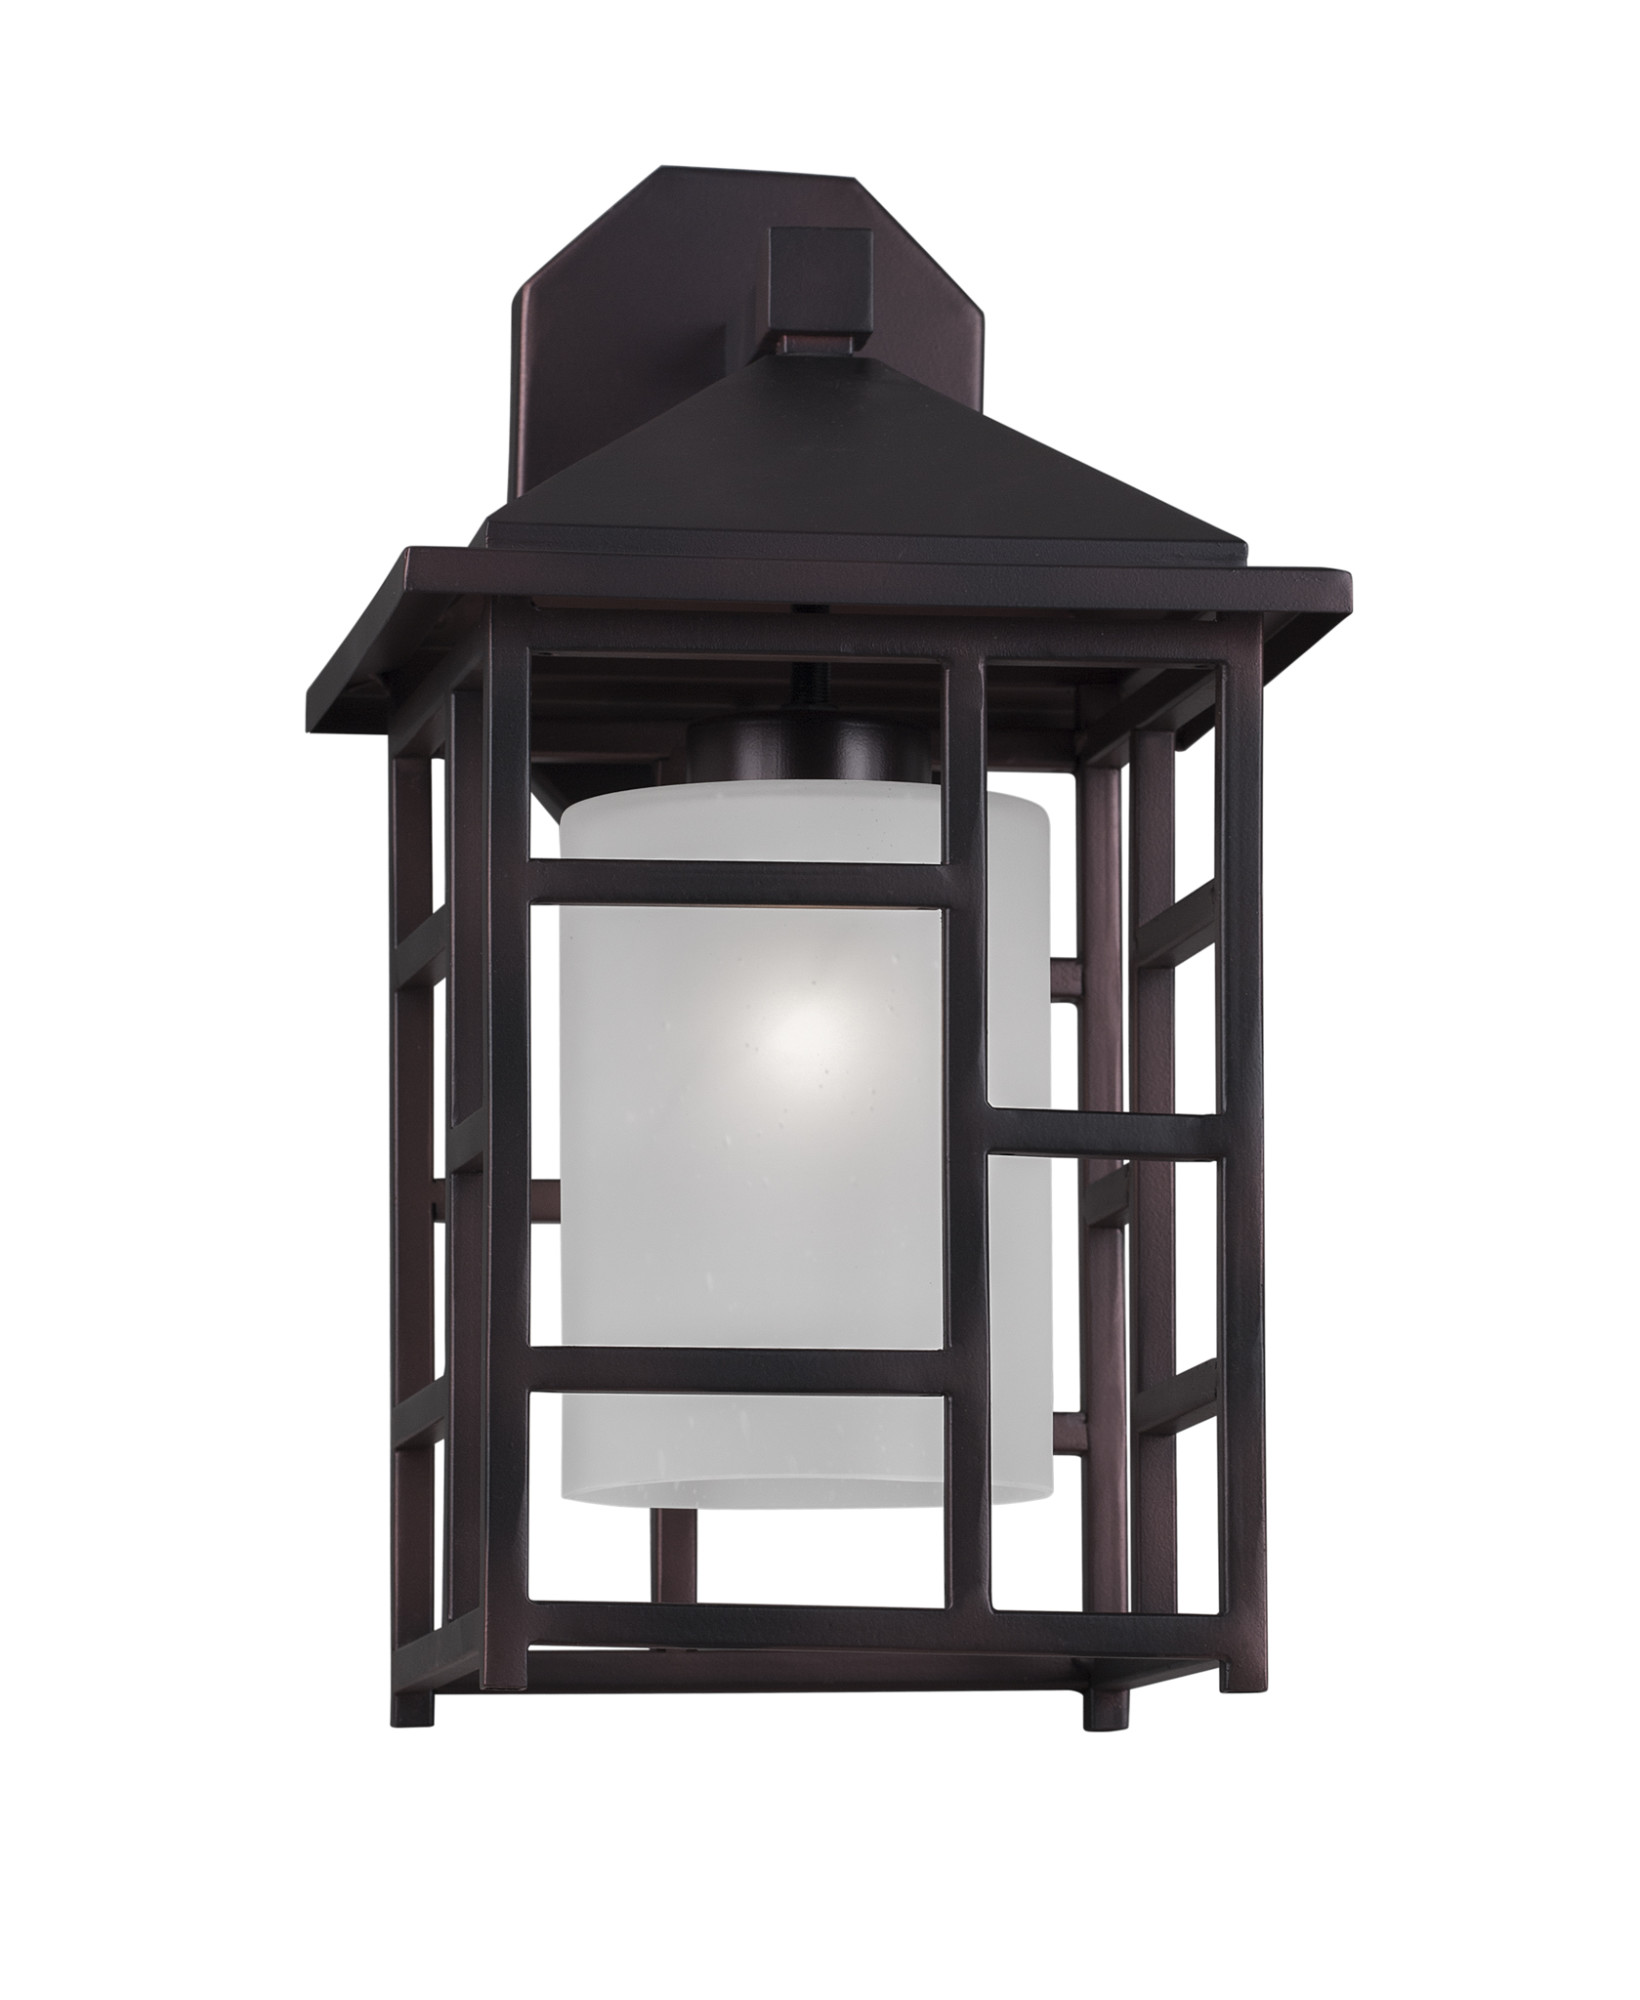 Forte Lighting 1248-01 1 Light 15" High Outdoor Wall Sconce - Bronze - image 2 of 4